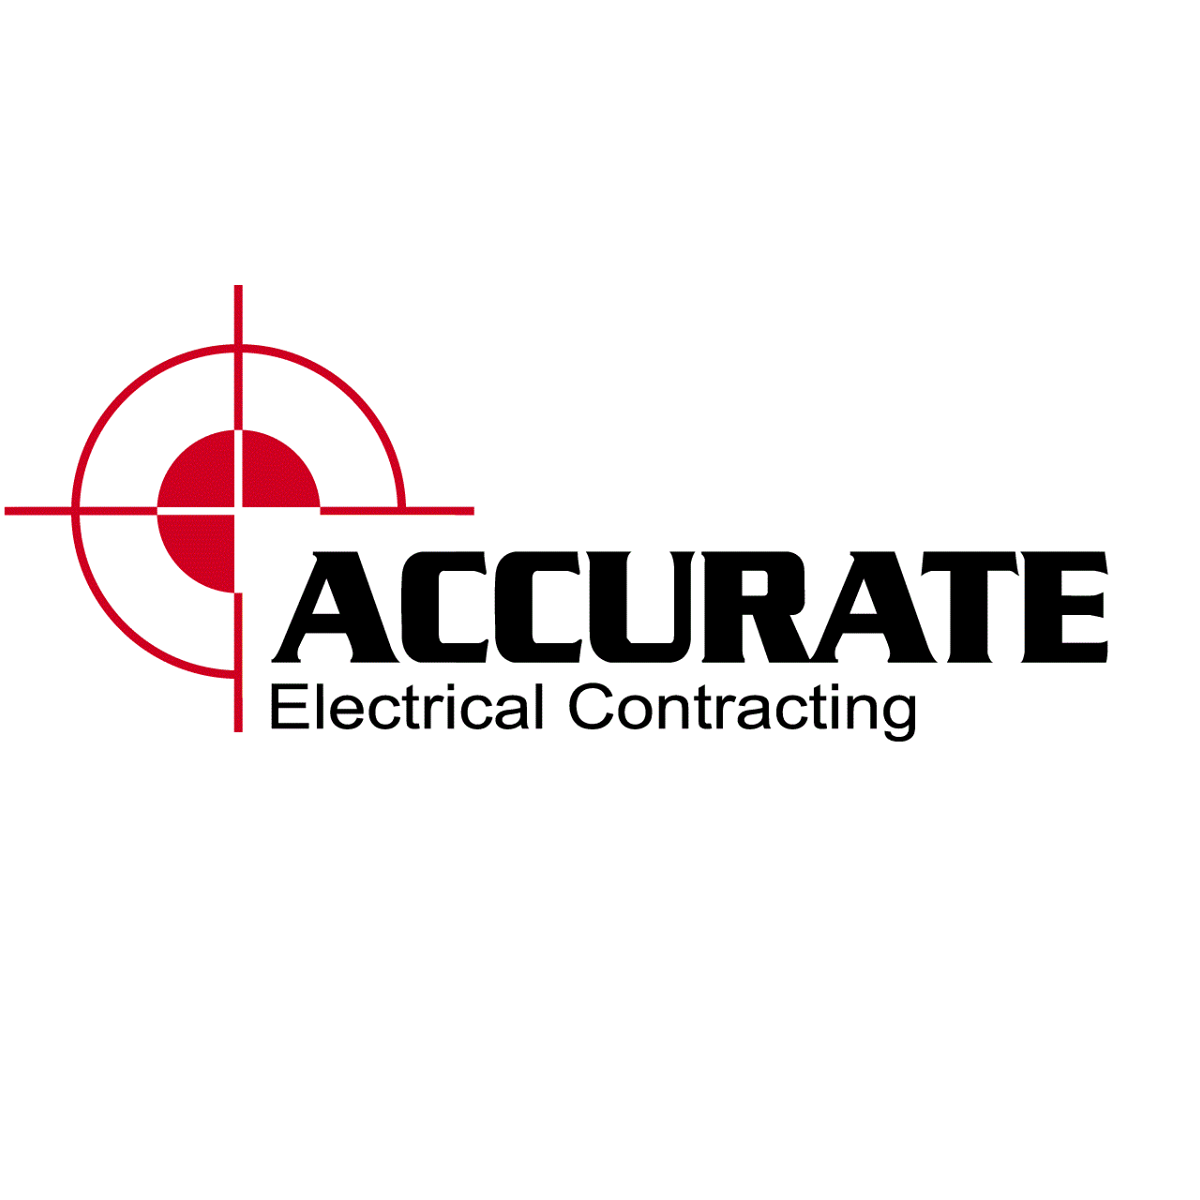 Accurate Electrical Contracting S.A.E